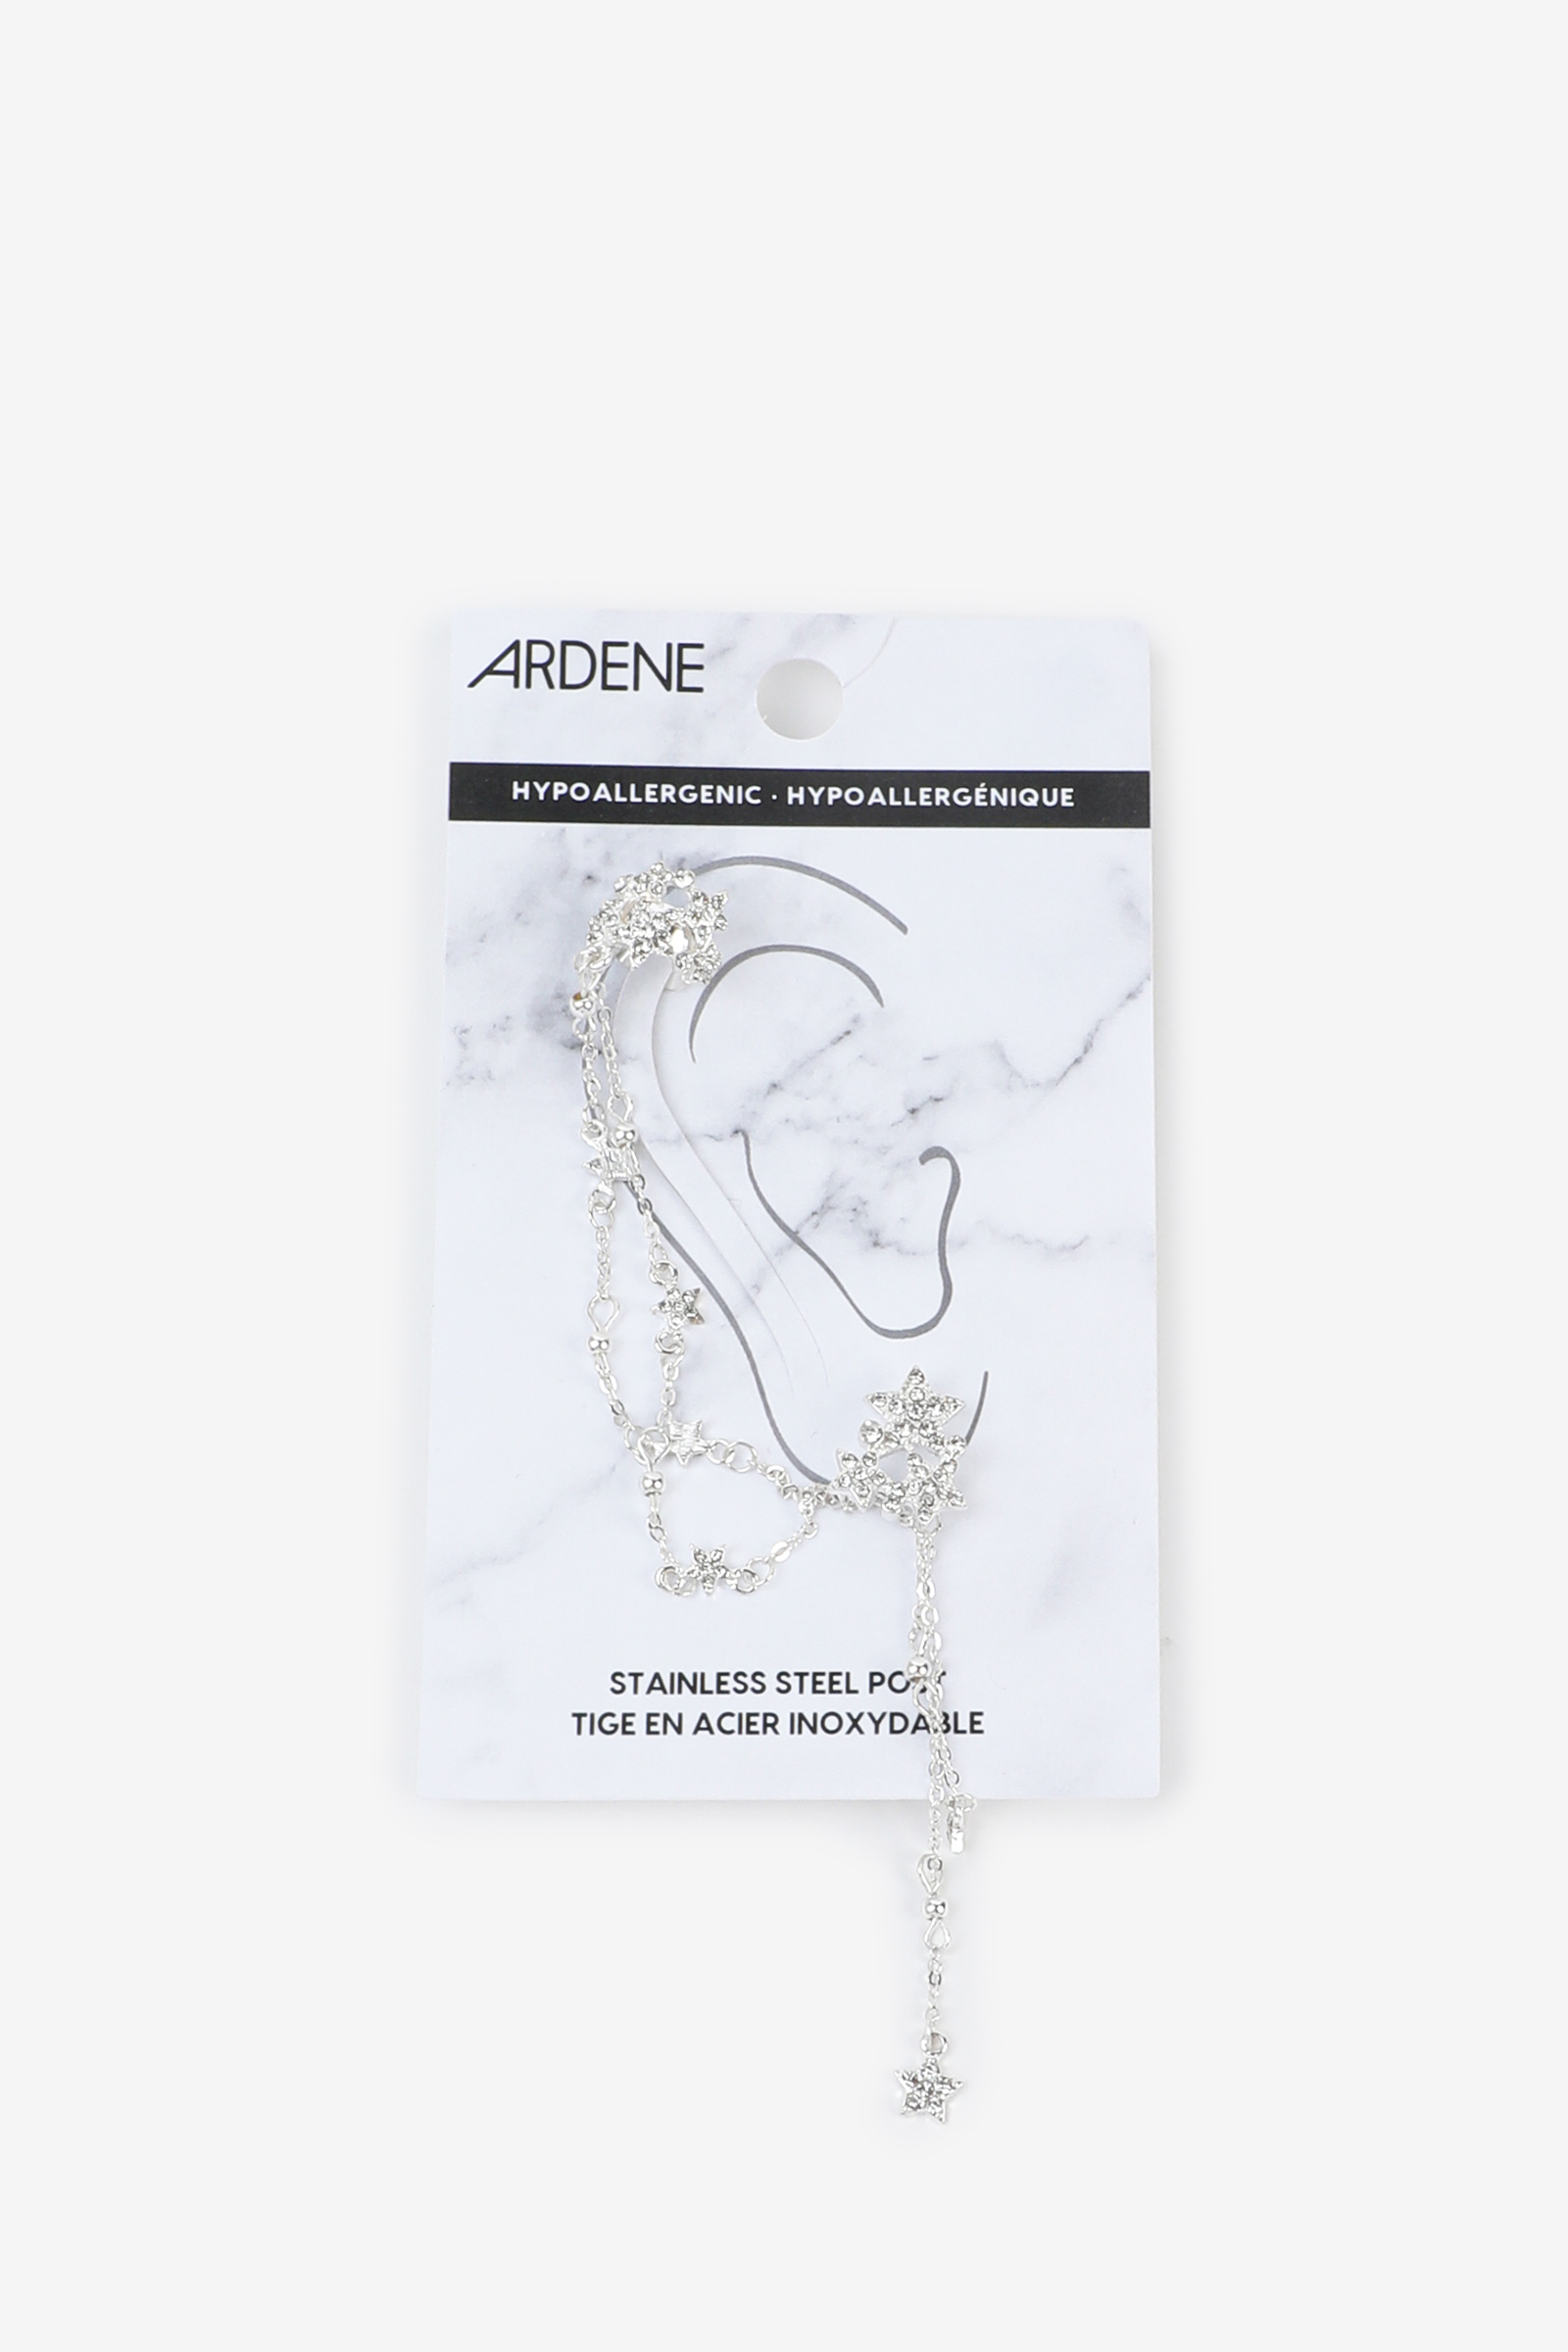 Ardene Calestial Pave Cuff Earring in Silver | Stainless Steel